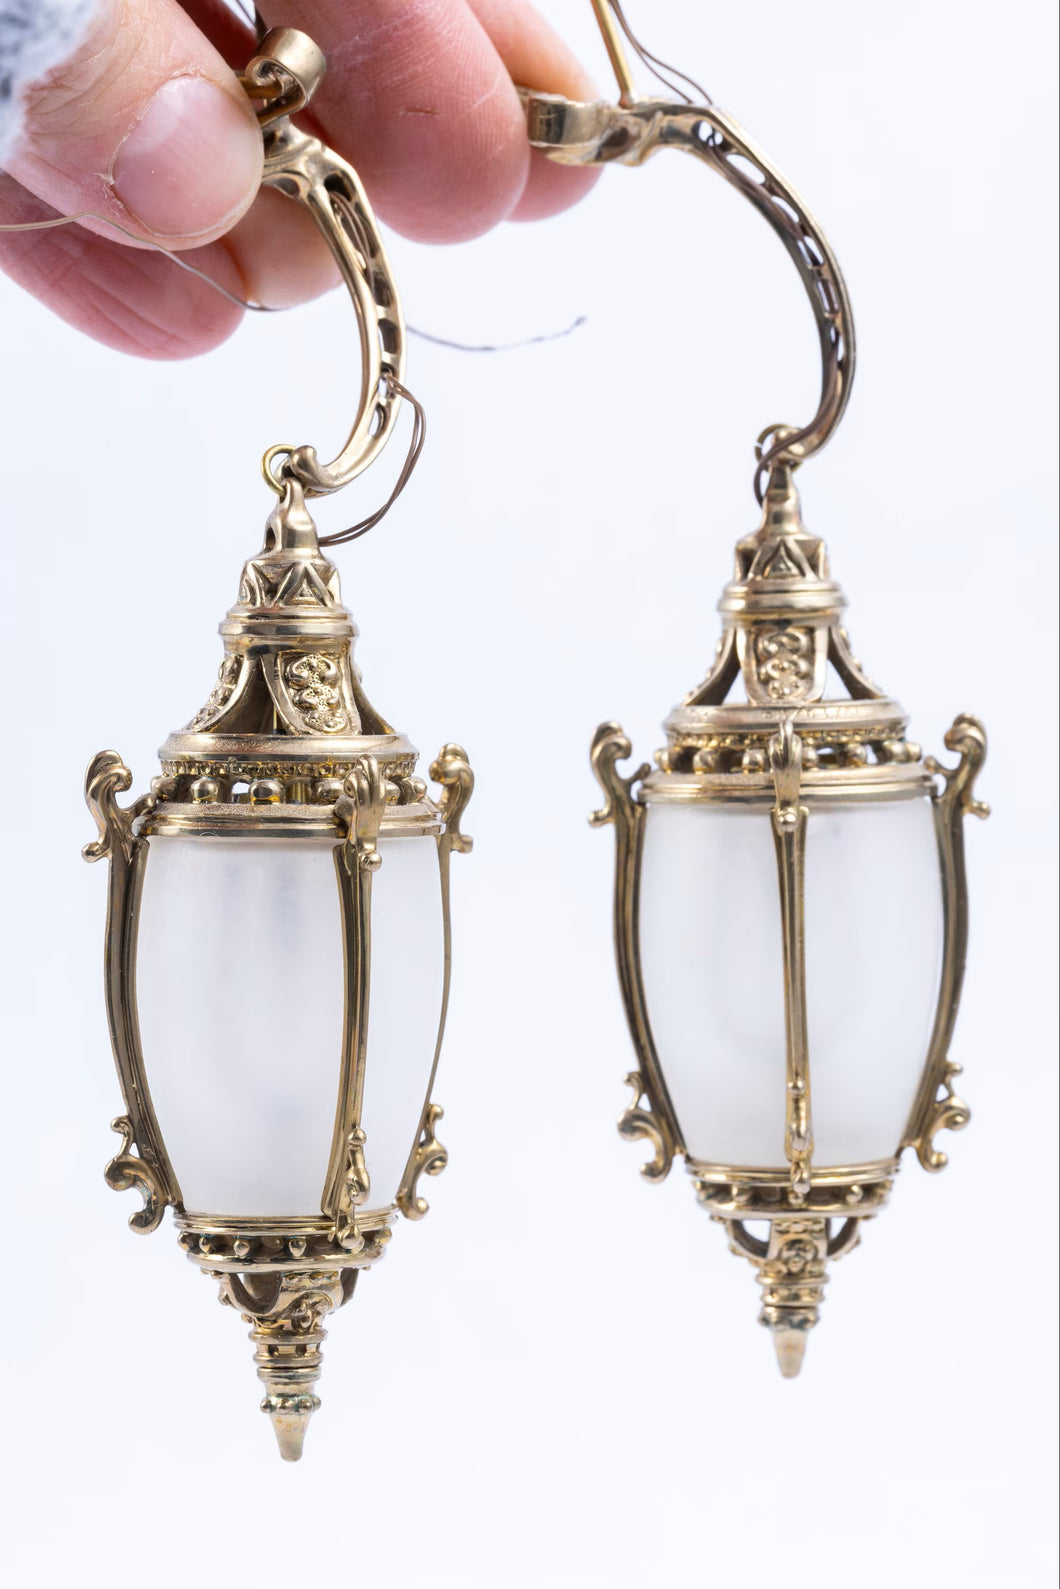 BTB Scotts Lighting - Vtg. Pair of Beautiful Outdoor Lanterns with Brass Hanger - From Estate of Lee Lefkowitz